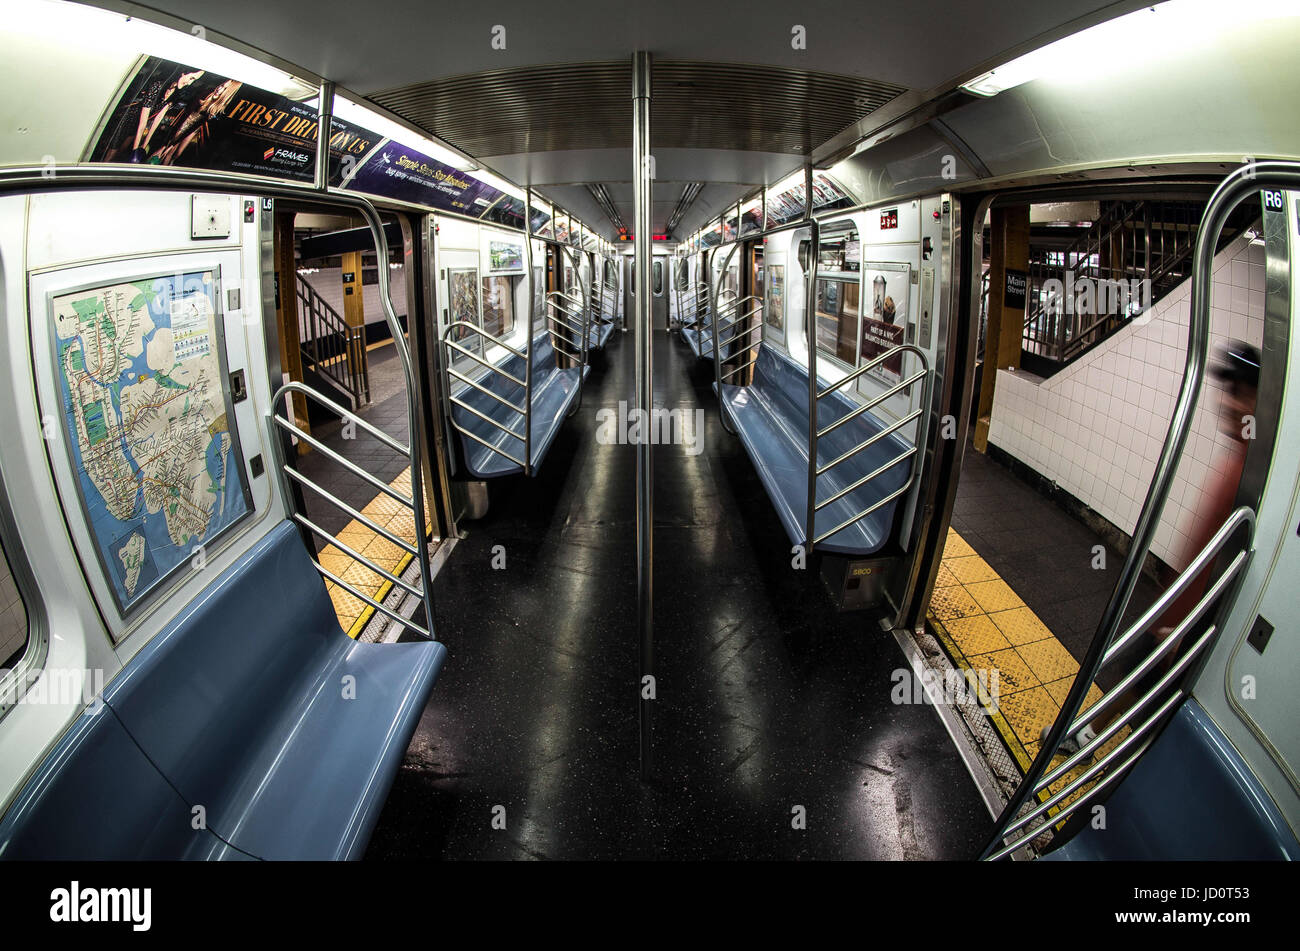 New York City, New York, USA. 5th Aug, 2016. A view from inside the NYC MTA 7 train standing at Main St. The 7-line is one of NYC's most heavily-used lines, connecting Main St., Flushing to the new Hudson Yards station on the west side of Manhattan. Credit: Sachelle Babbar/ZUMA Wire/Alamy Live News Stock Photo